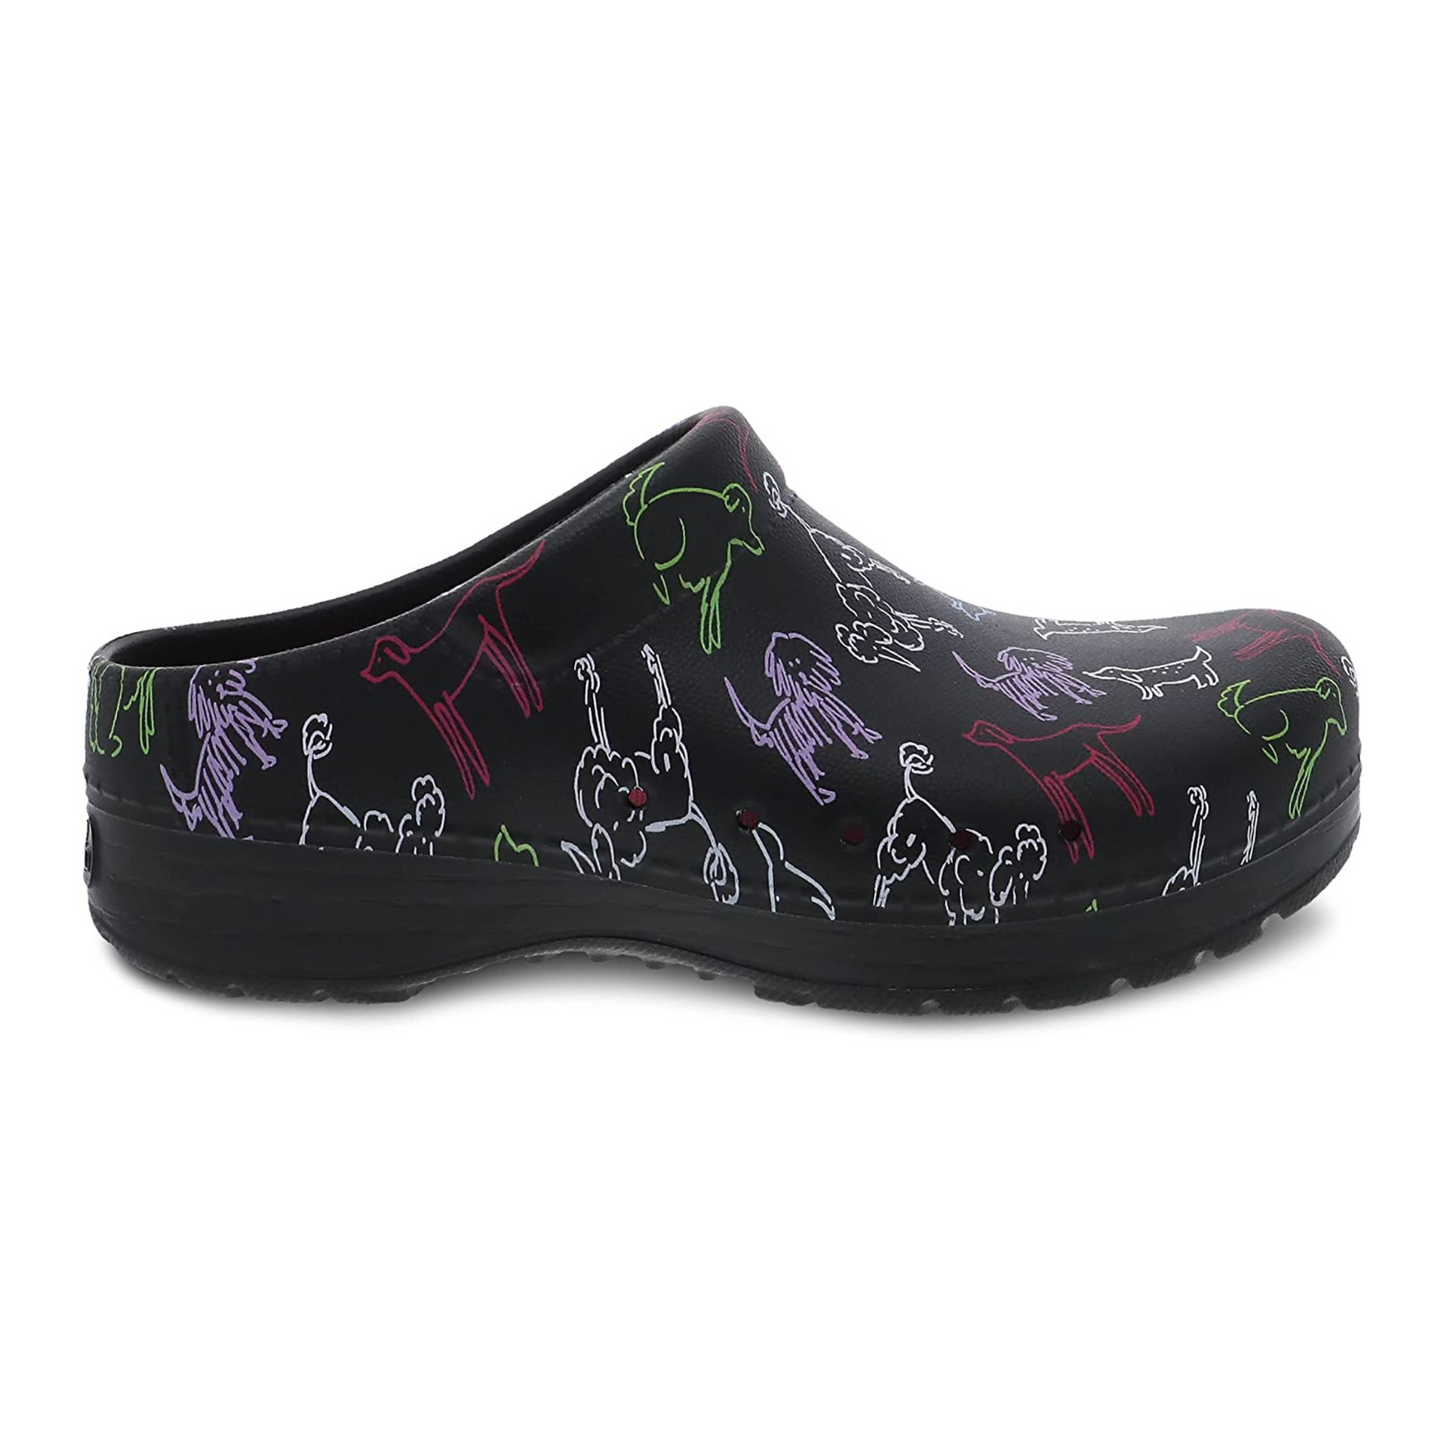 A right view of a black clog with a colourful dog pattern, five small holes in the side, and a pink insole.